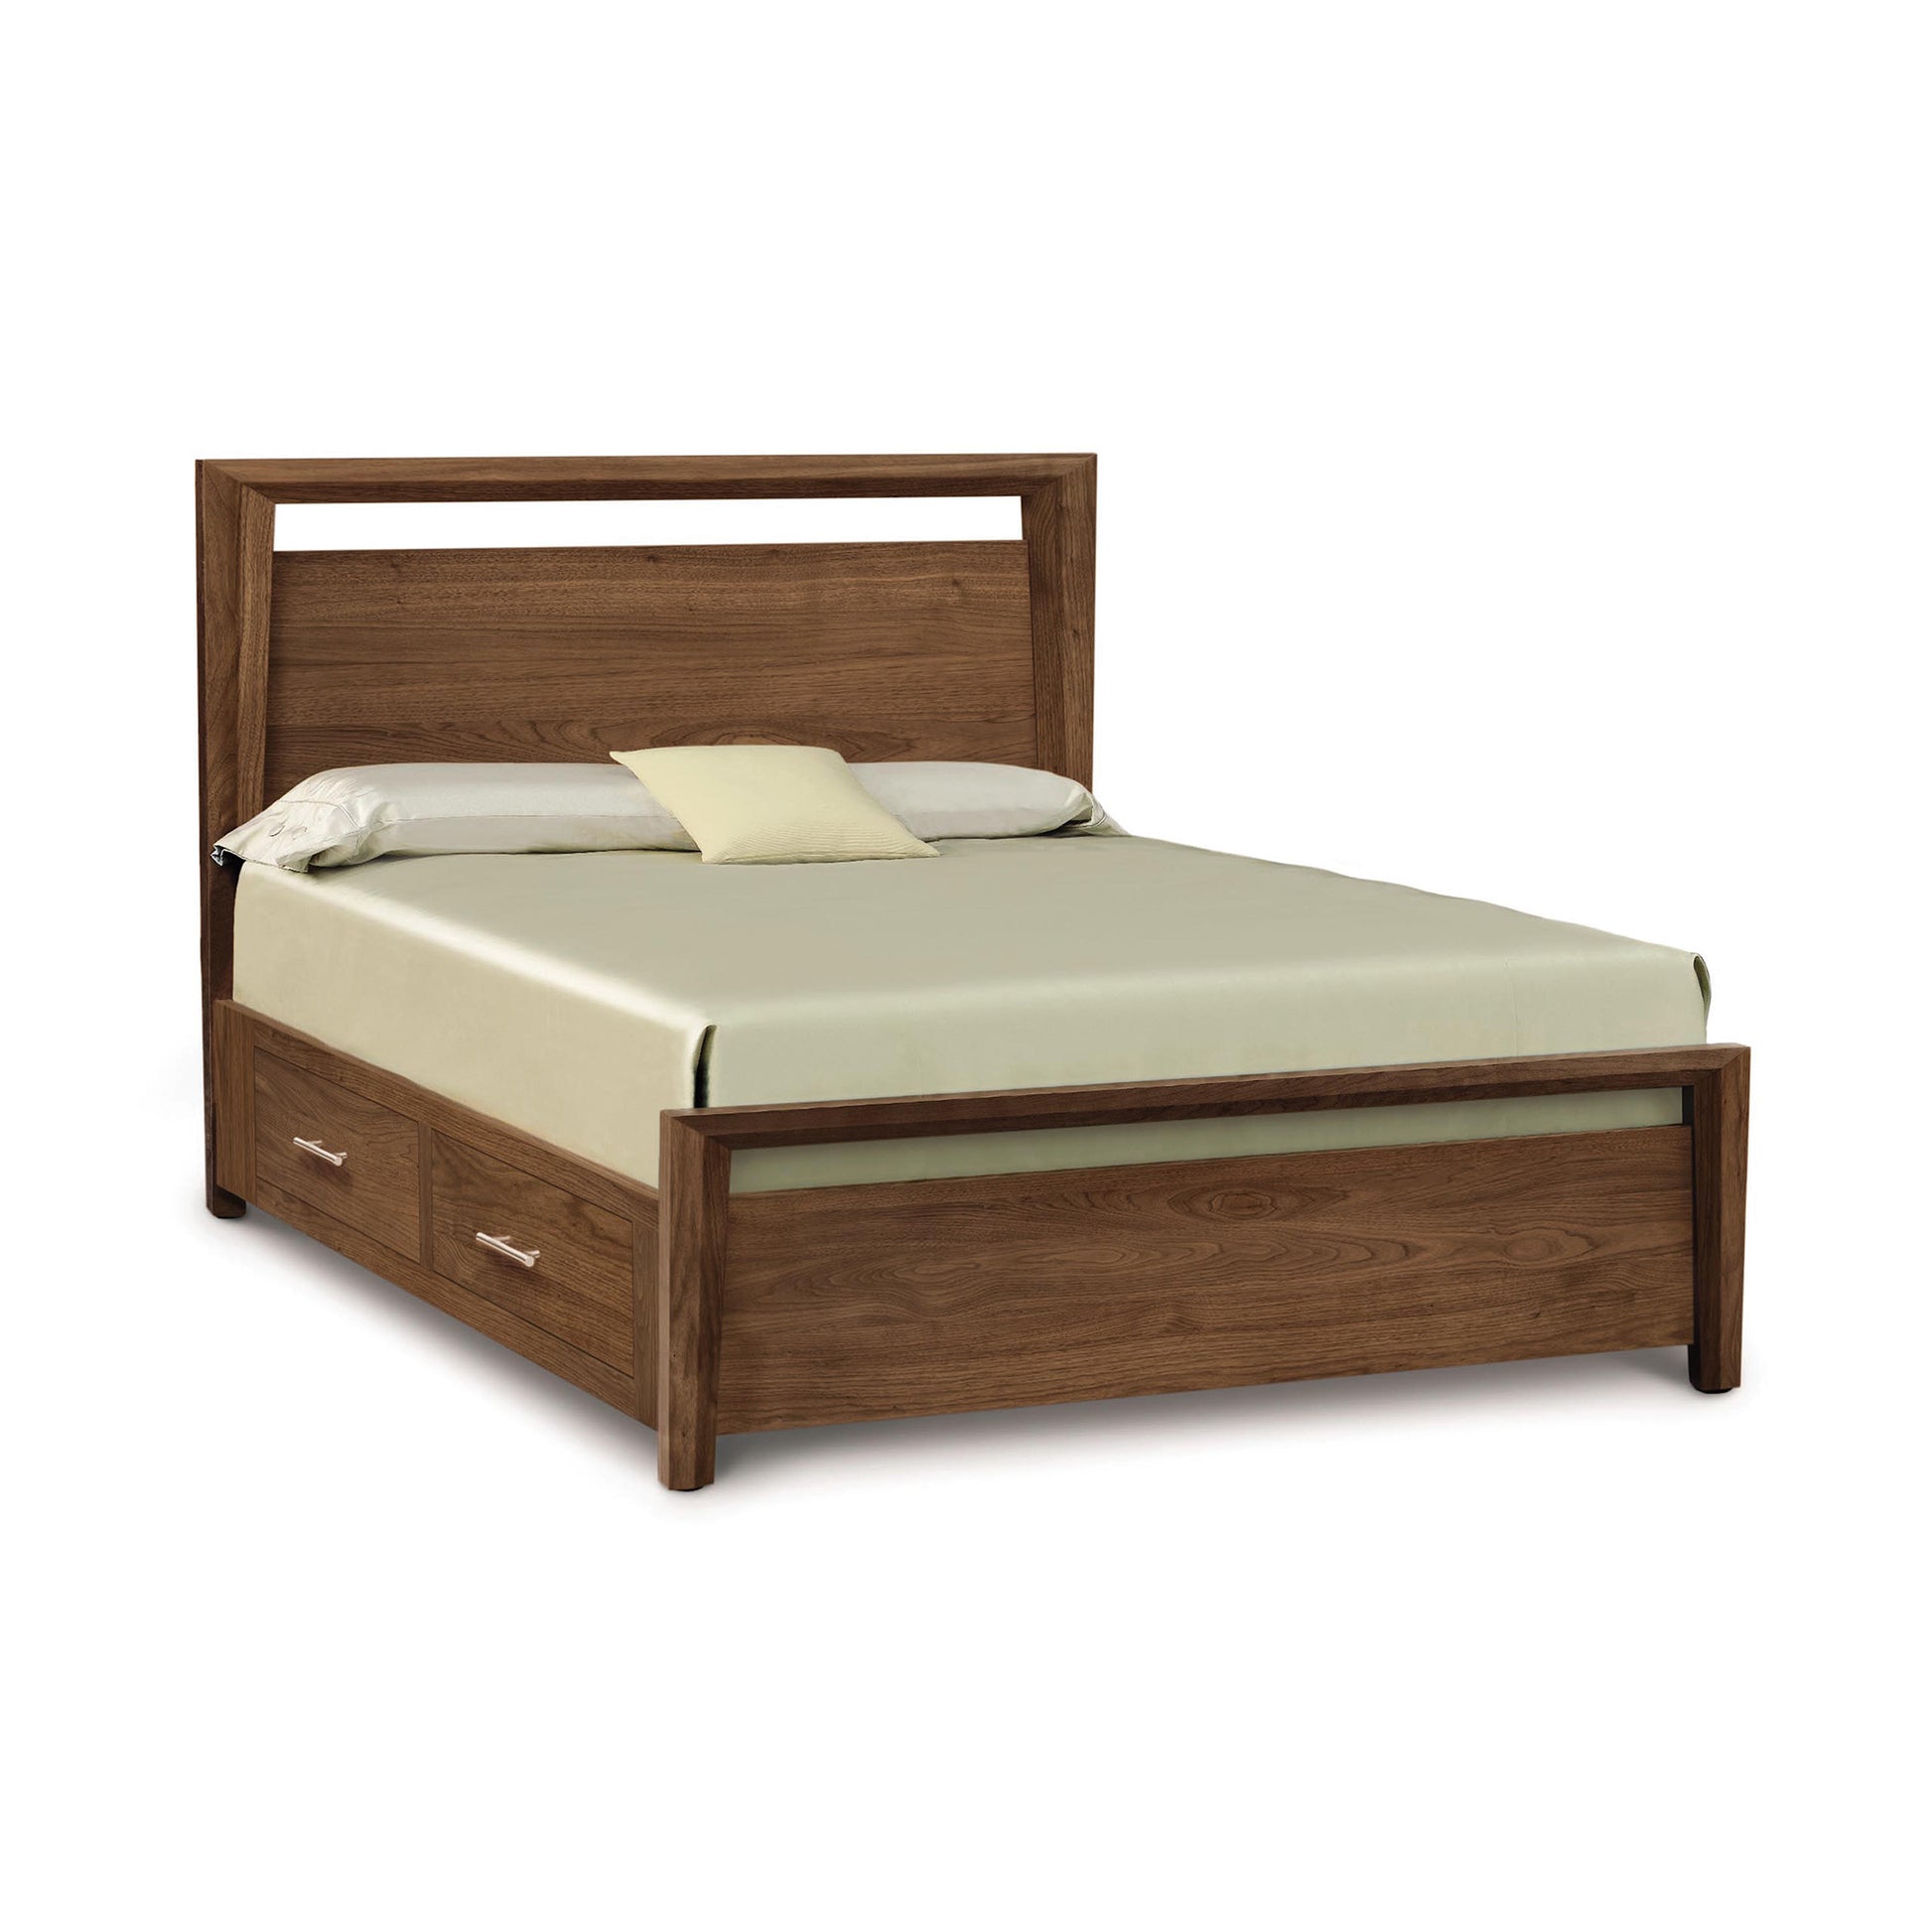 A Copeland Furniture Mansfield Walnut Storage Bed designed in the Arts & Crafts style, featuring solid wood construction with a simple headboard and two storage drawers at the foot, accompanied by a pale green bedsheet.